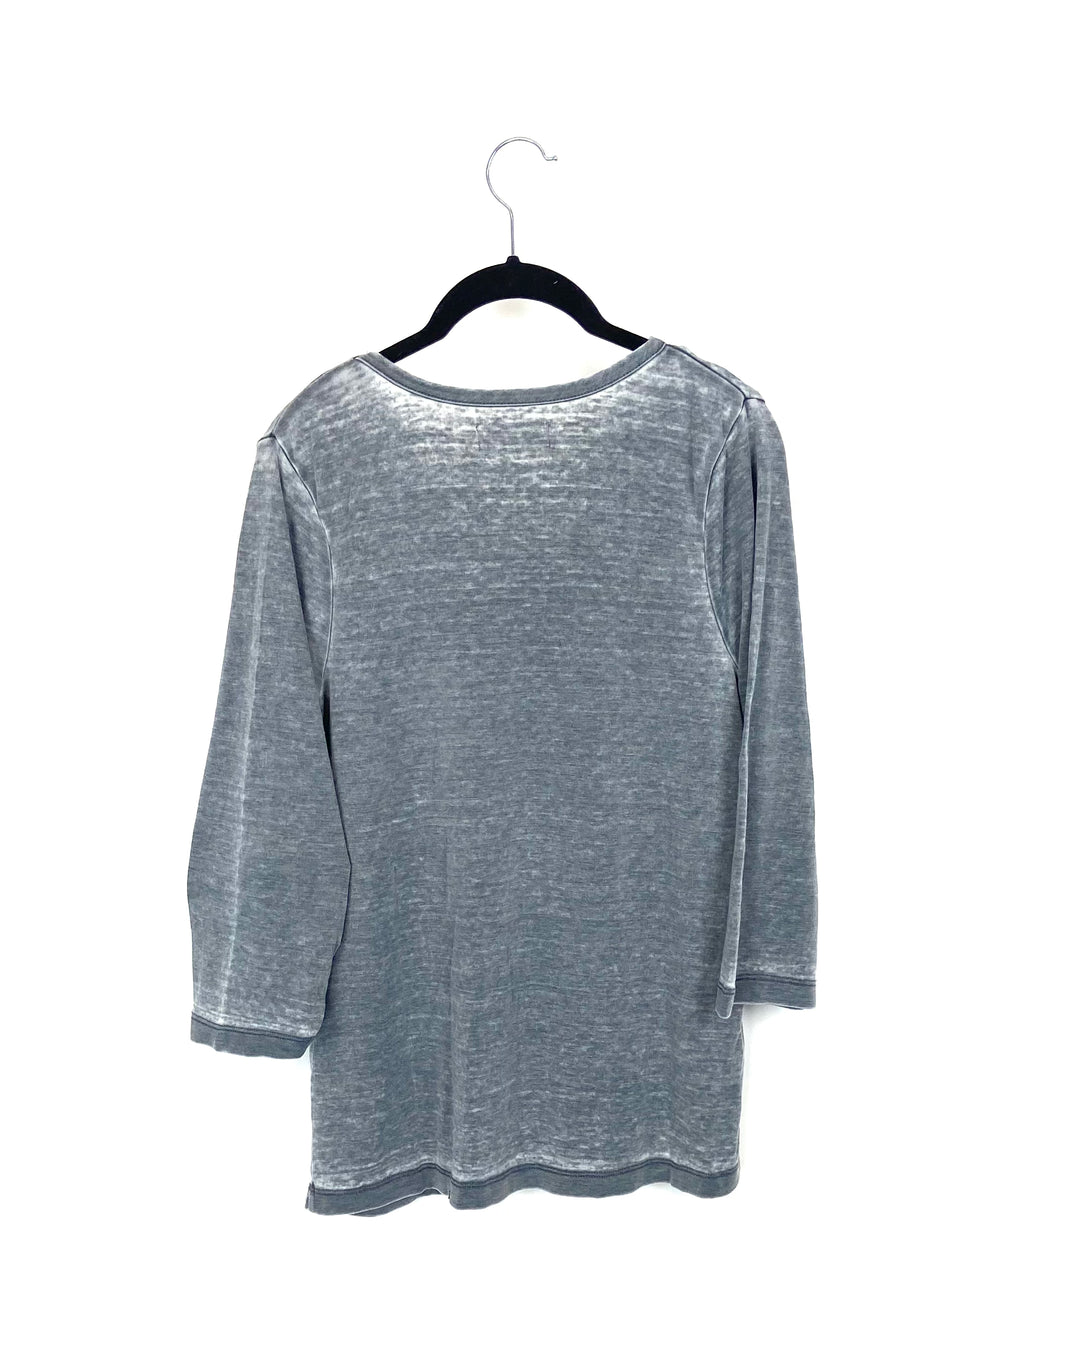 Grey Long Sleeve Top - Size Small